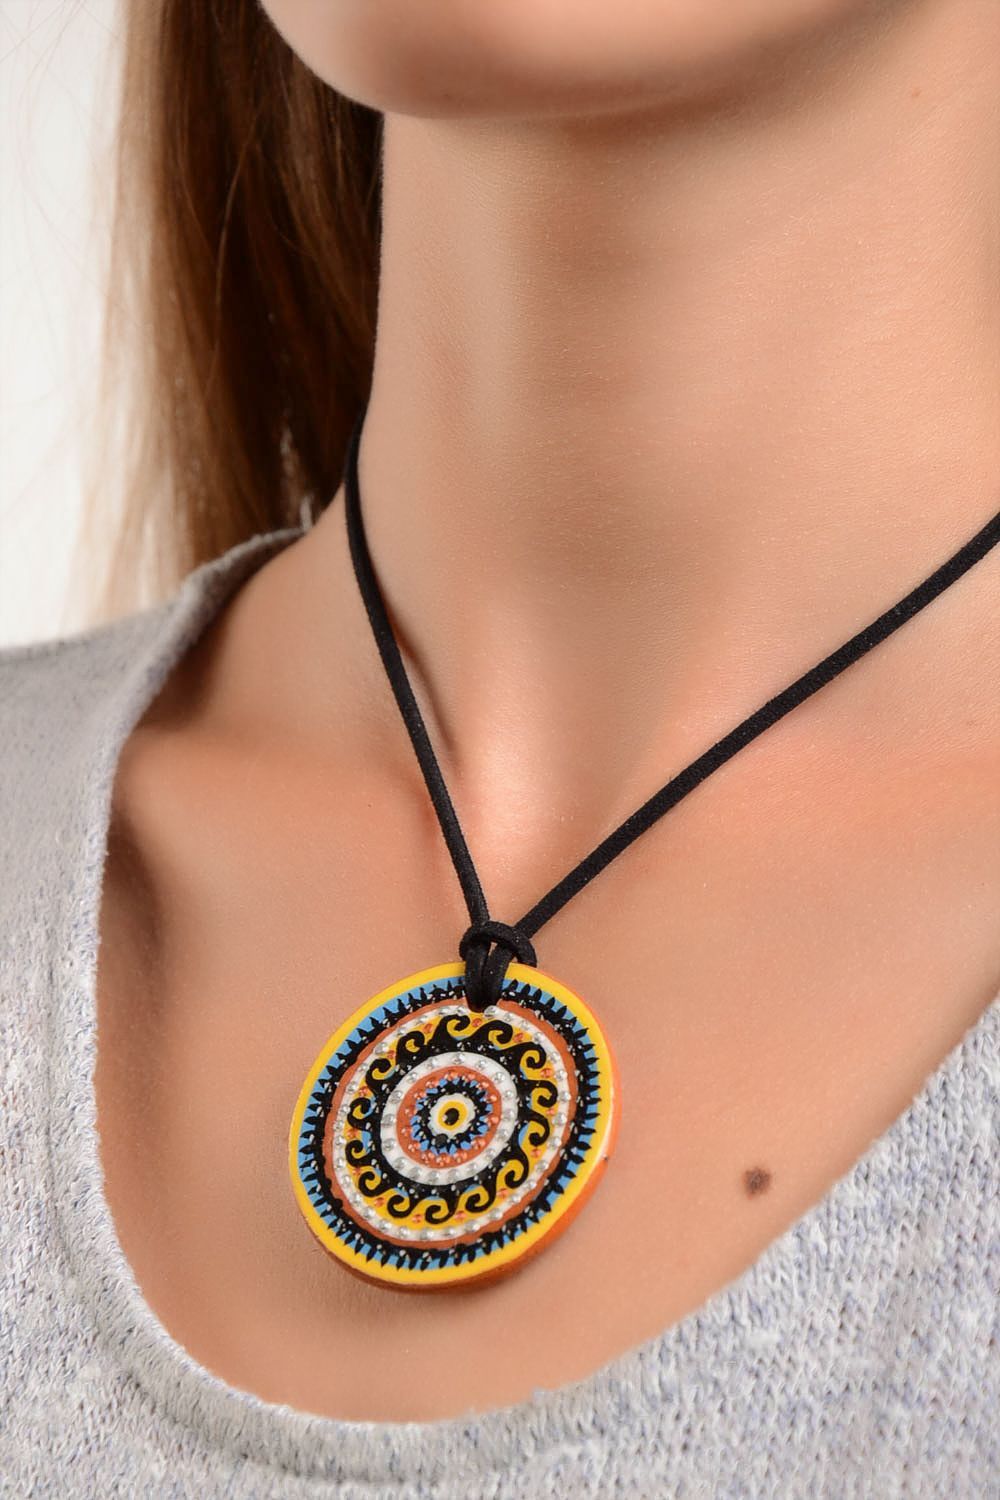 Handmade necklace ceramic jewelry ethnic jewelry pendant necklace gifts for girl photo 1